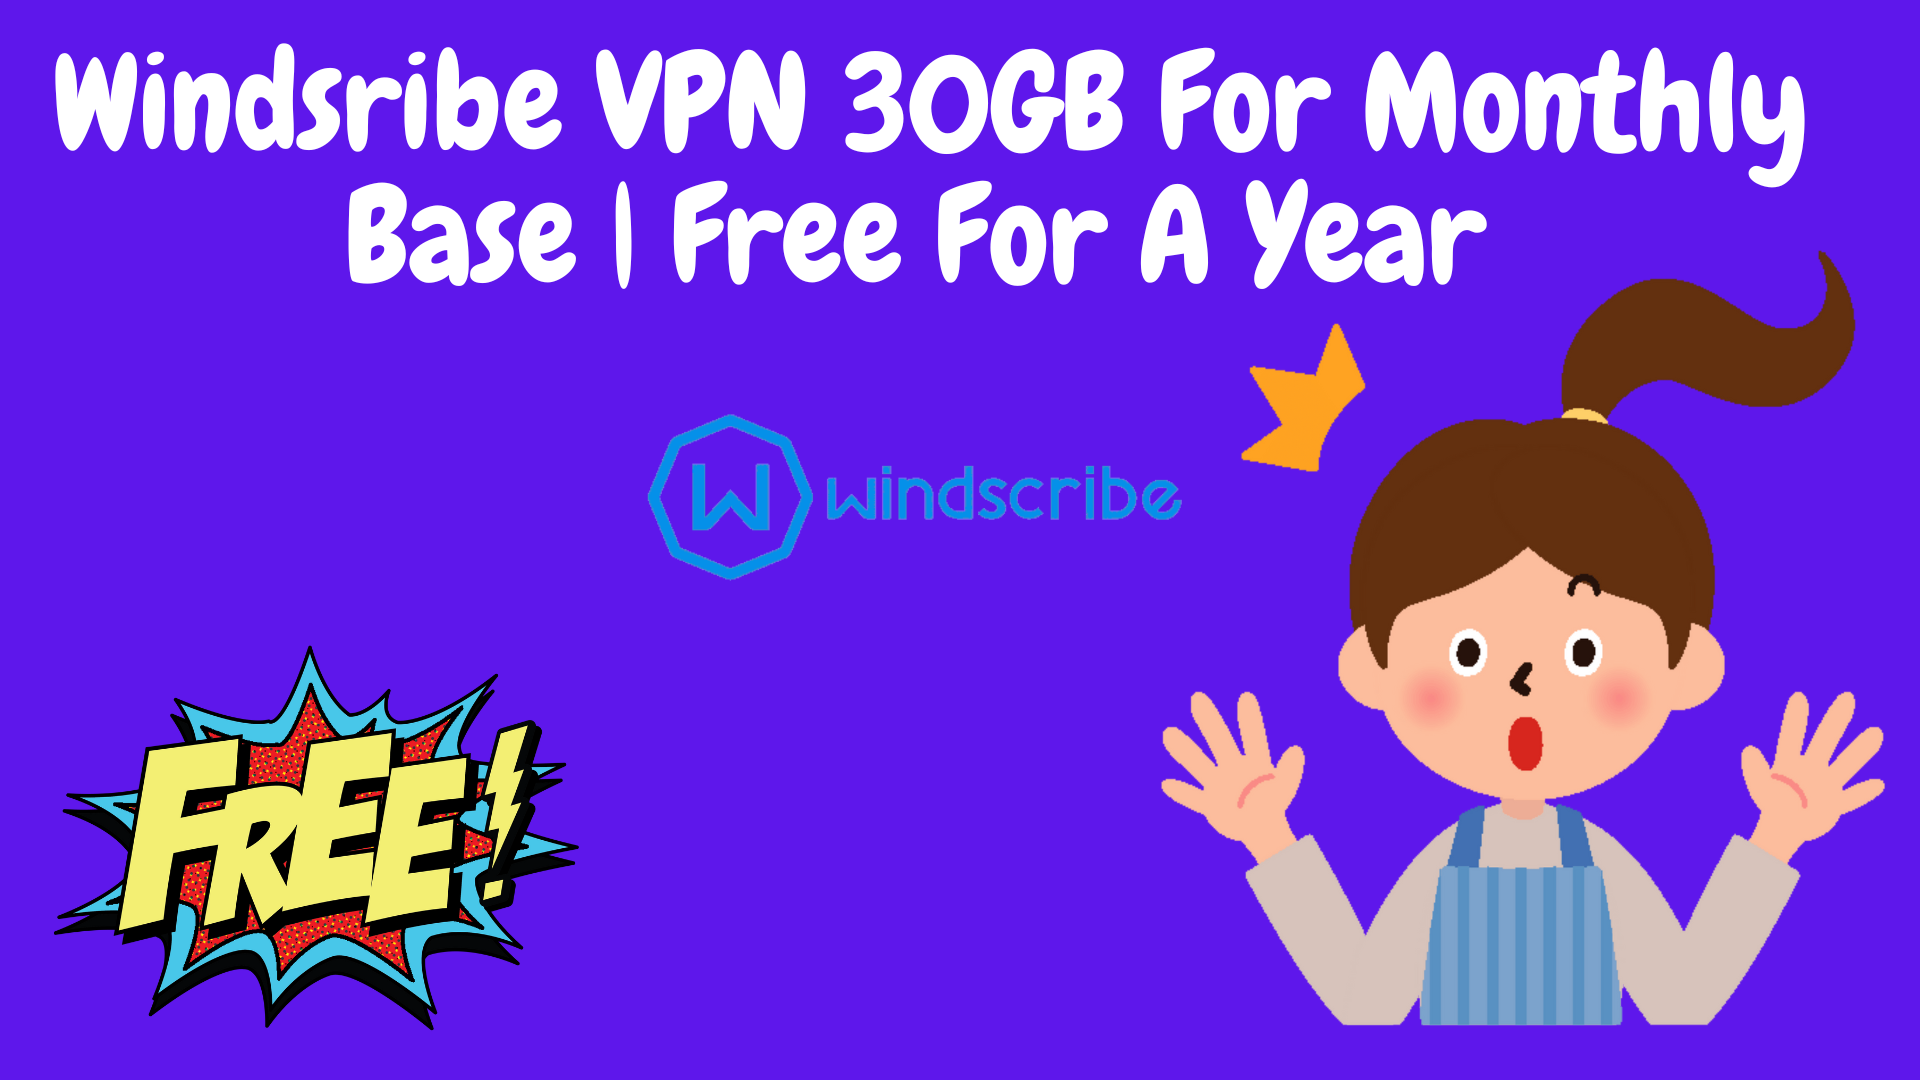  windsribe vpn 30gb for monthly base | free for a year